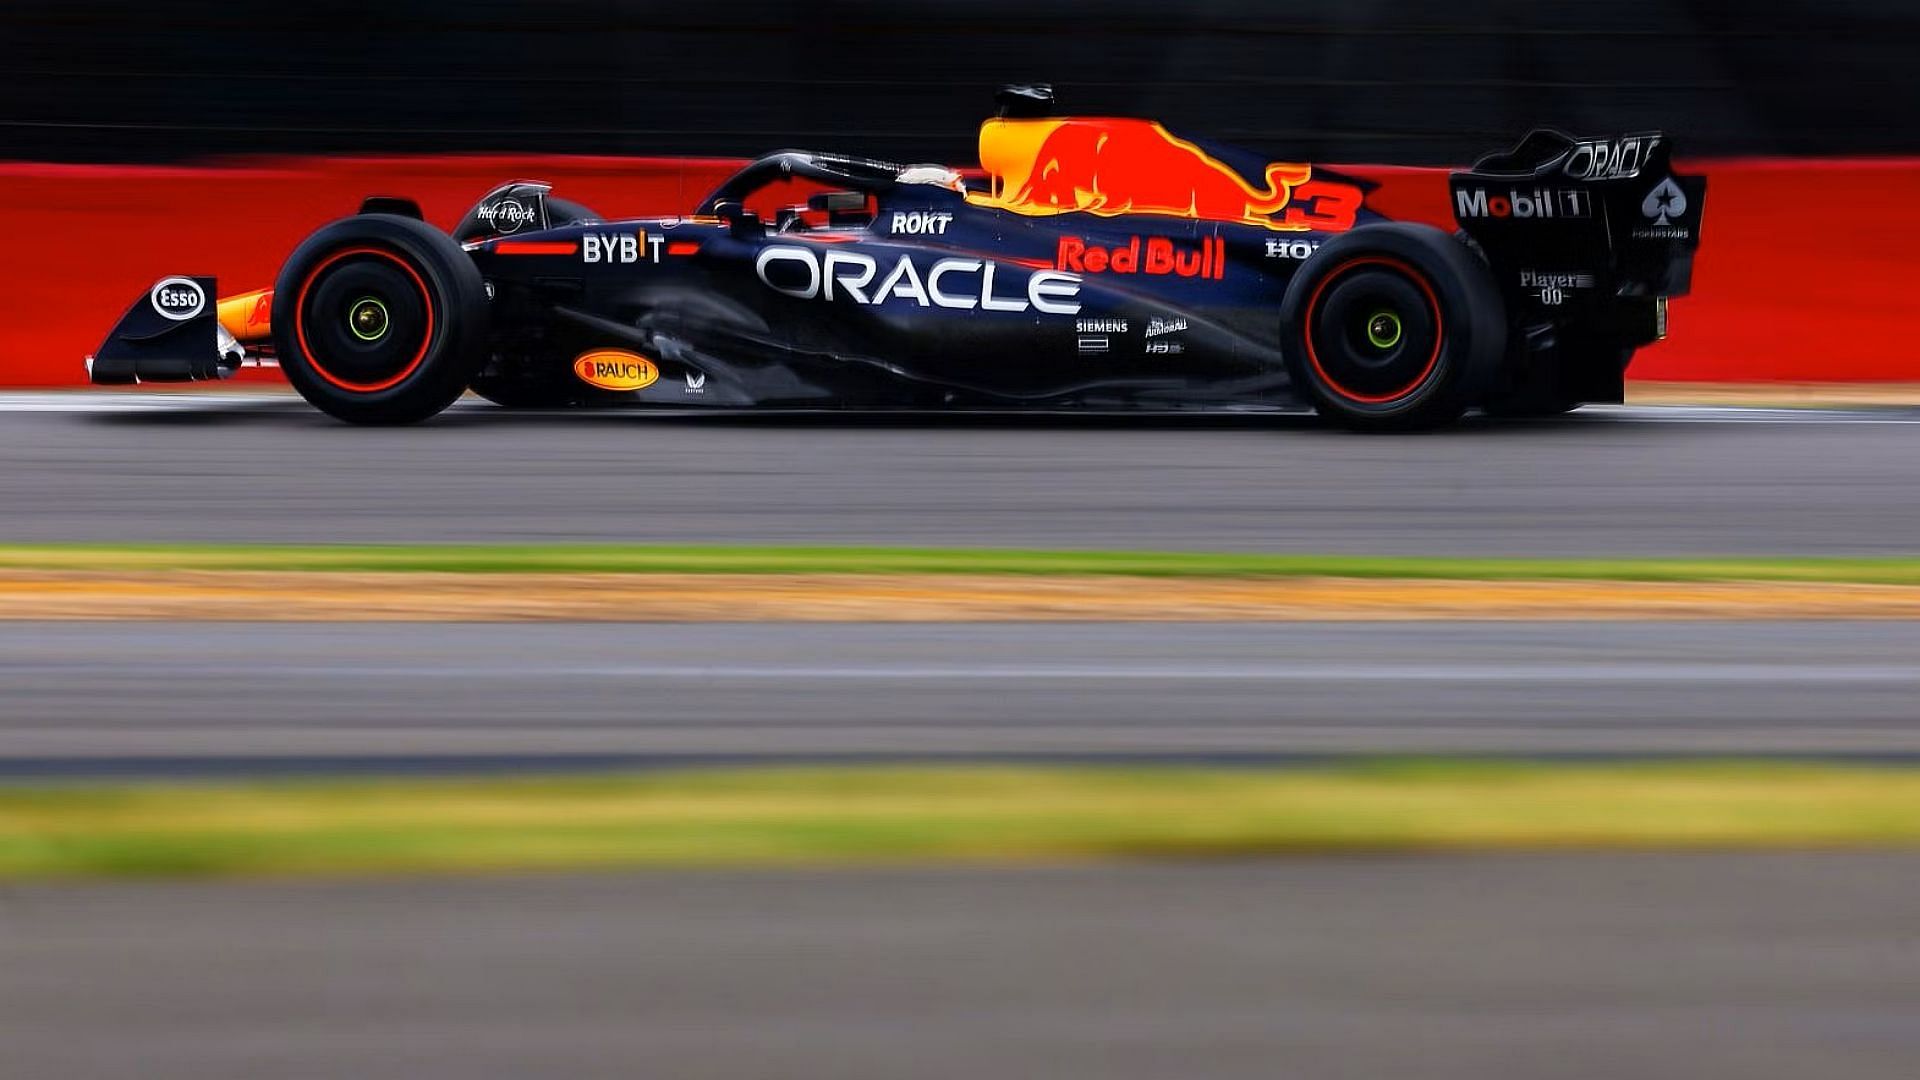 Daniel Ricciardo (3) on track during Formula 1 testing at Silverstone Circuit. (Photo by Mark Thompson/Getty Images)